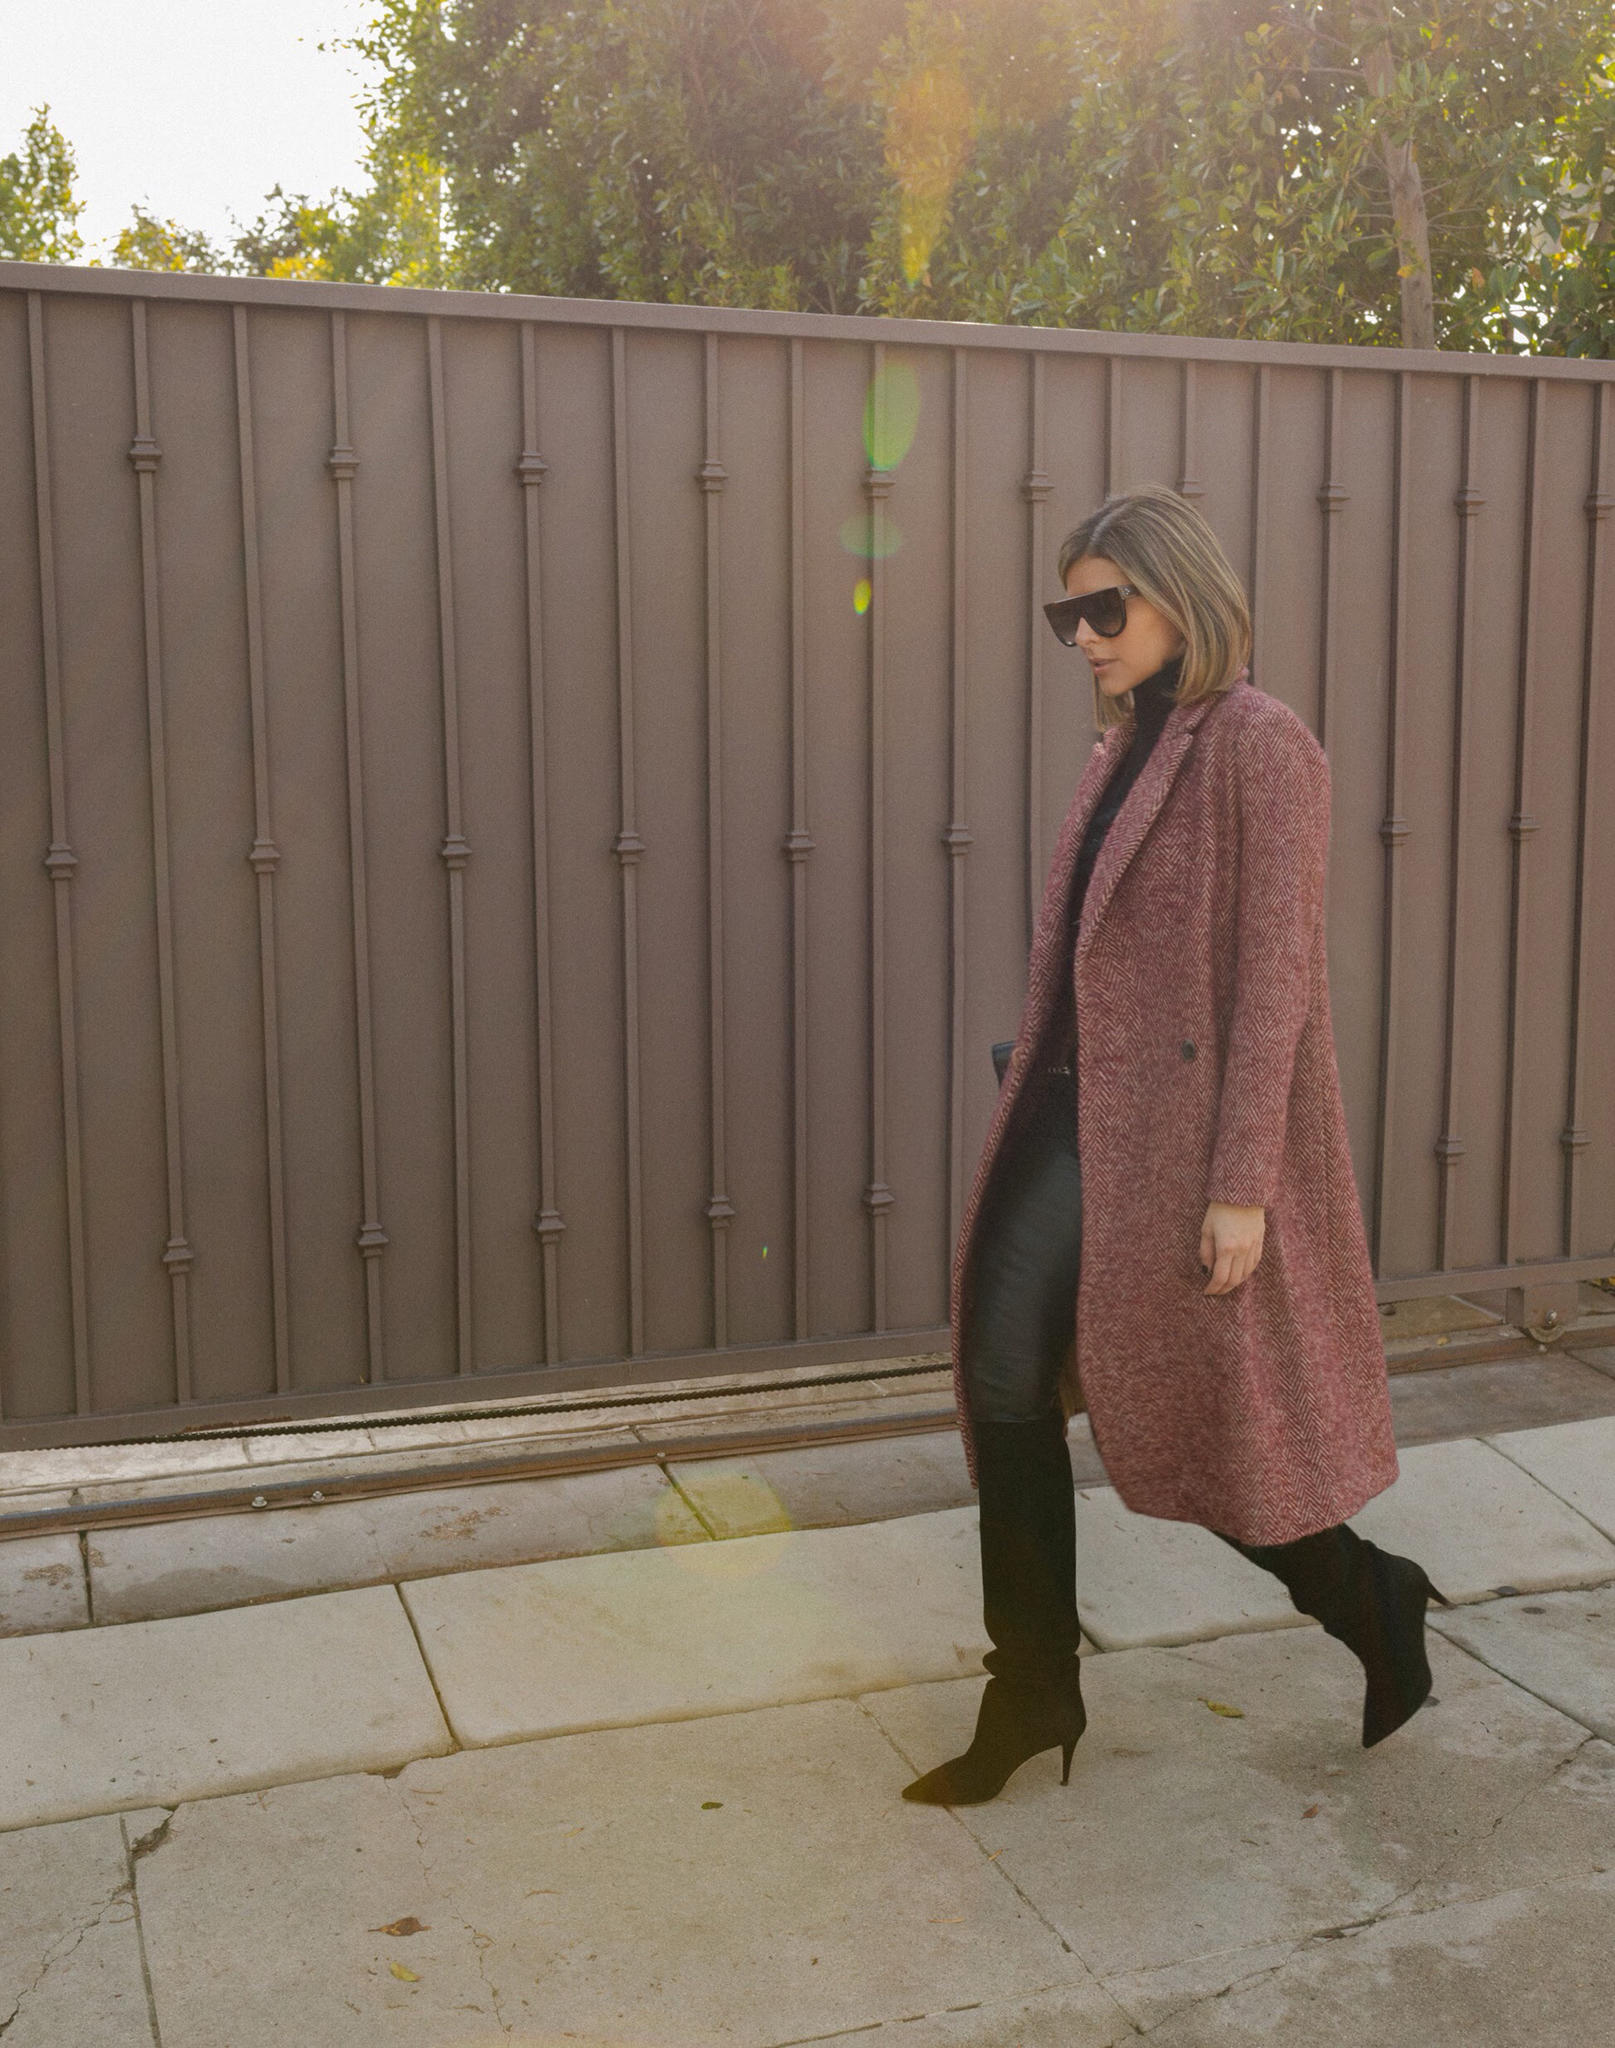 Statement Coats to Get You Through Winter by Pam hetlinger | TheGirlFromPanama.com | Red Tweed Coat, chic winter outfit, winter layers, celine sunglasses